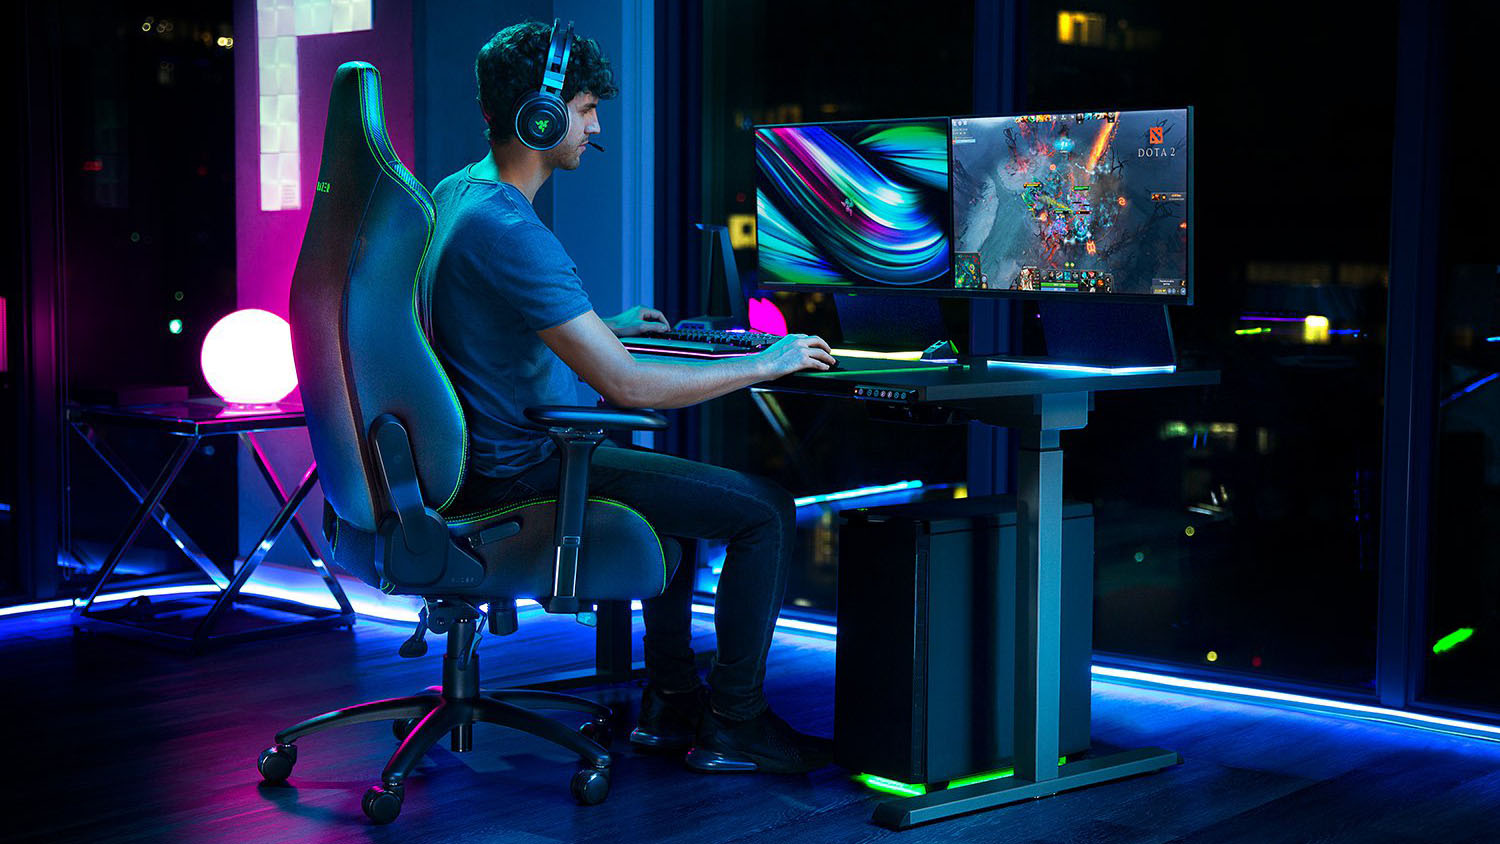 Best gaming chair for 2021 - CNET